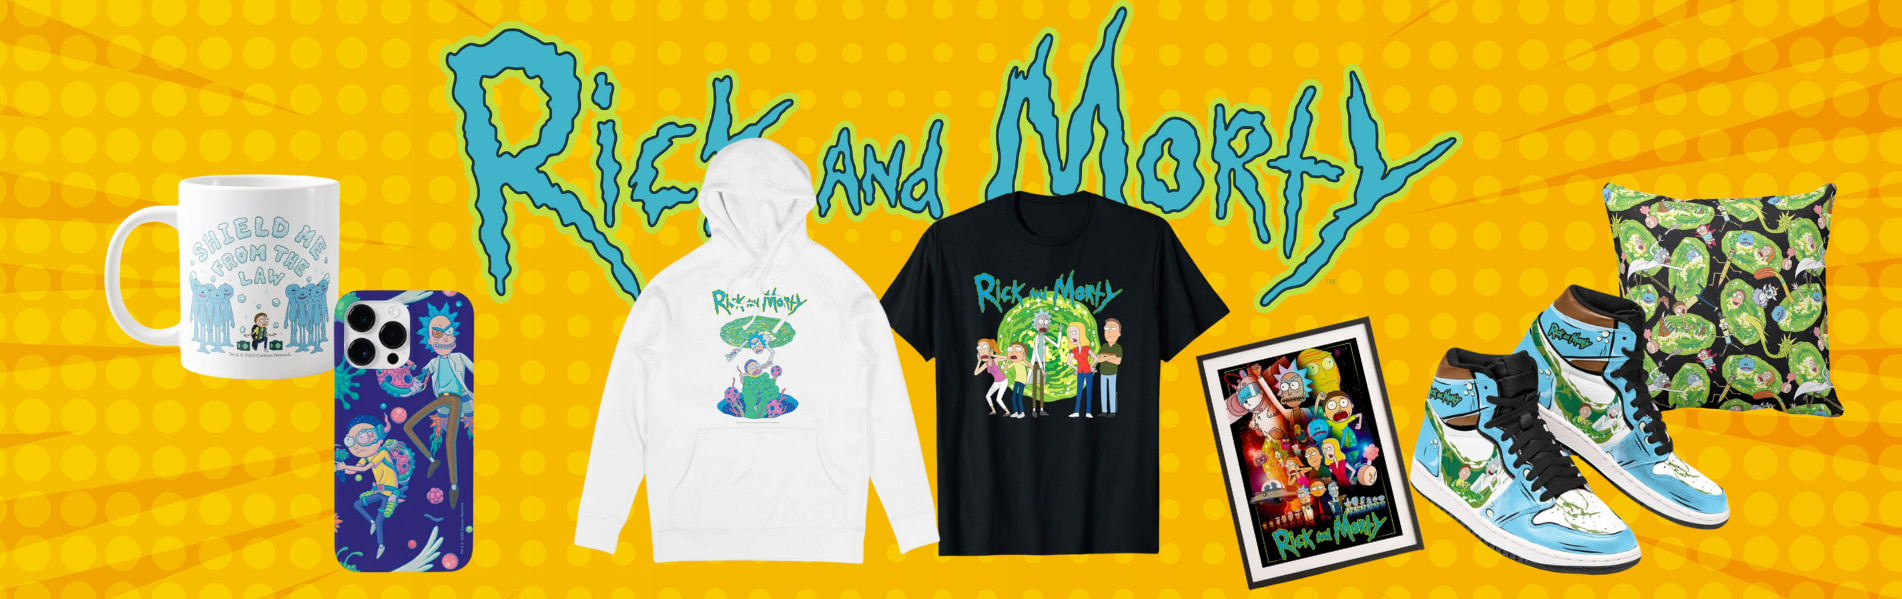 Rick and Morty Banner